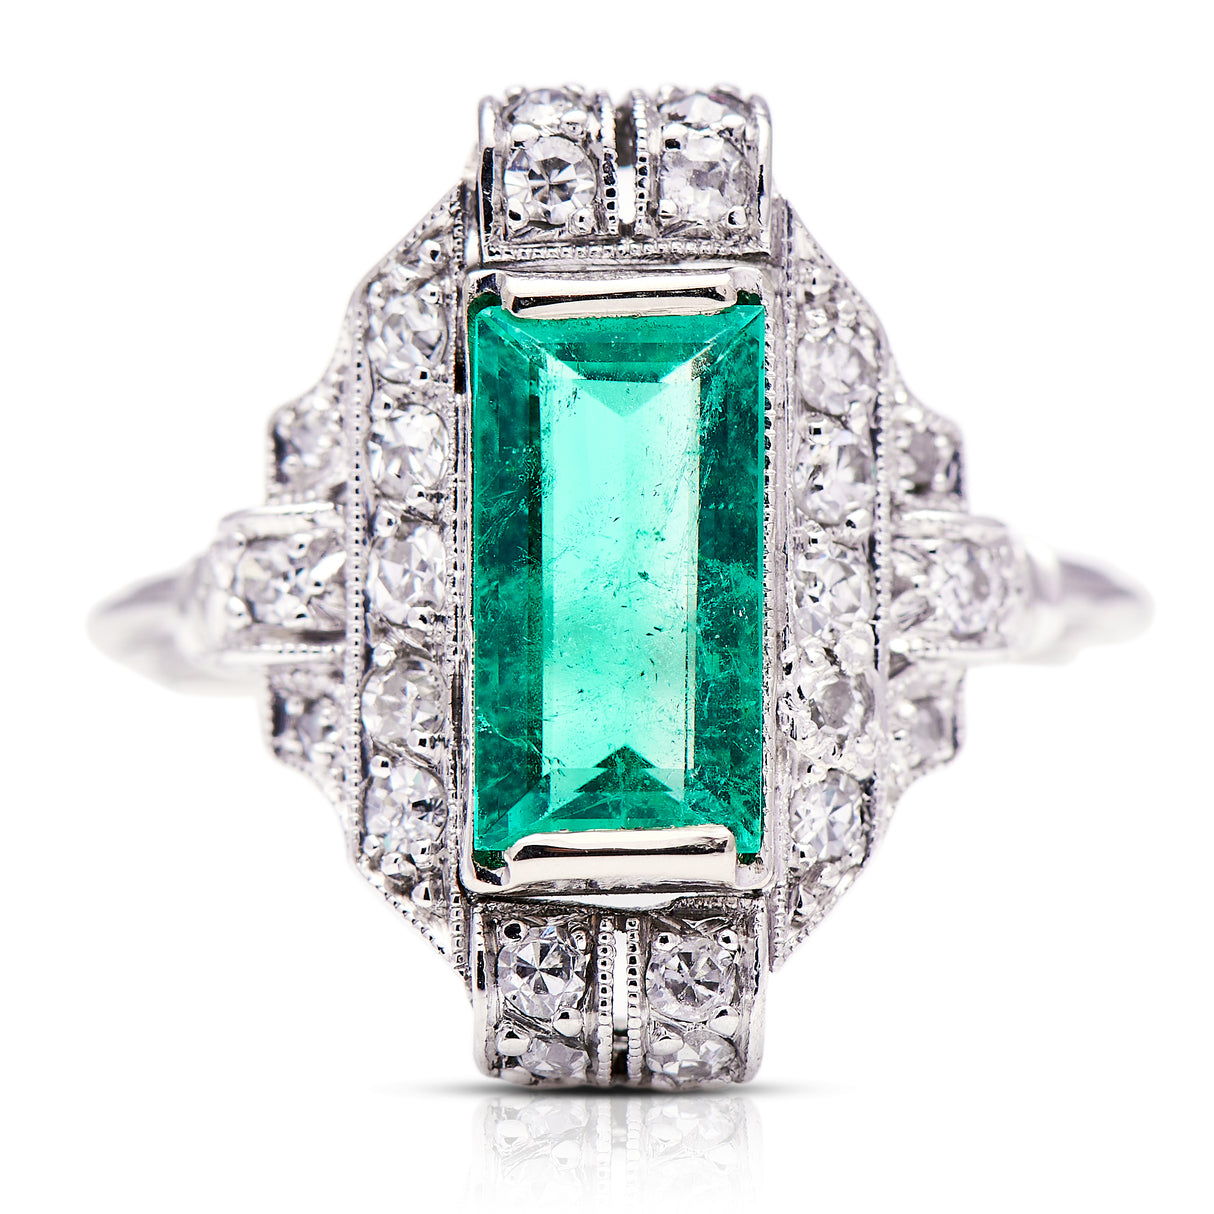 Emerald and diamond ring, circa 1900. Emerald Rings | Emerald Jewellery | Antique Emerald Rings | Antique Engagement rings | Emerald Engagement Rings | Diamond Rings | Diamond Engagement rings | UK Antique Jewellers | Art Deco Rings | Art Deco Jewellery | Cluster Rings | Antique Cluster